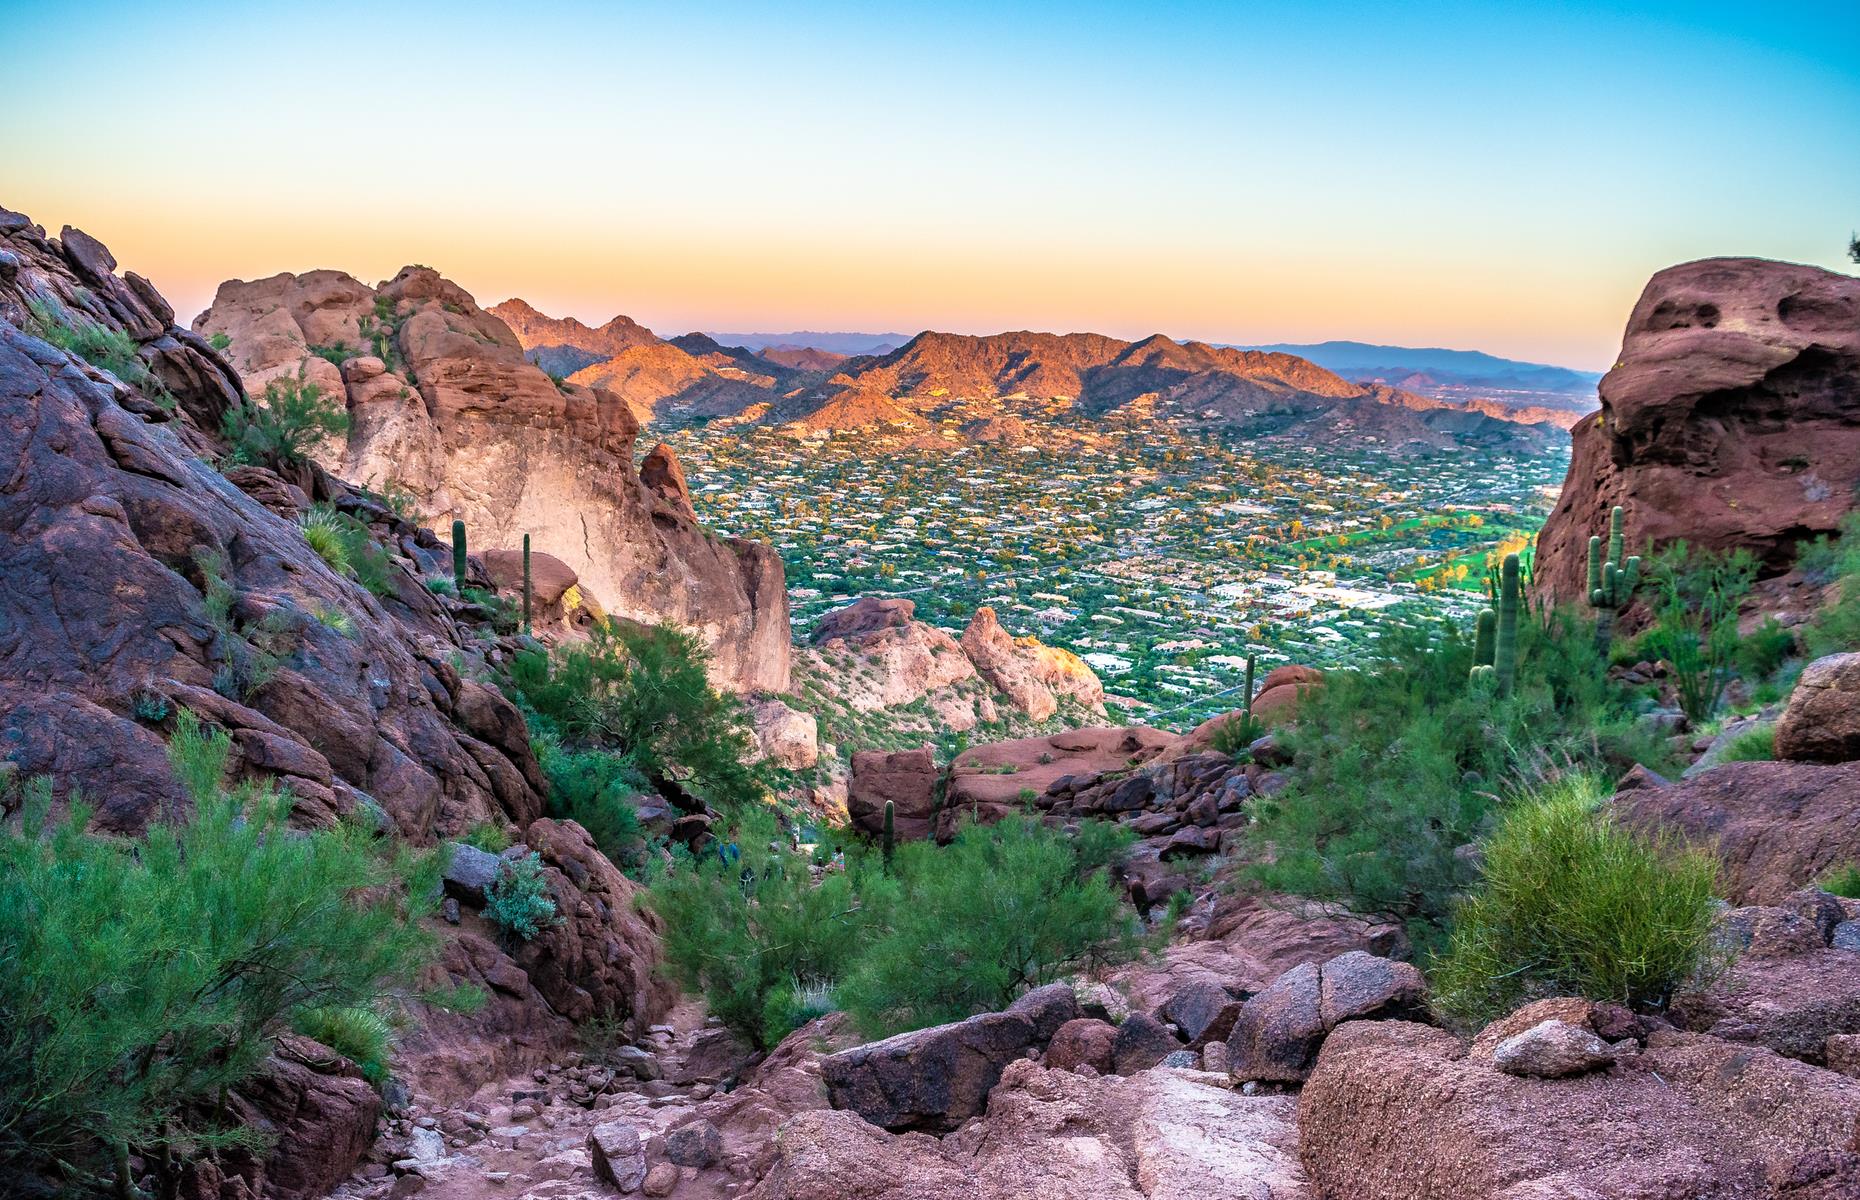 <p>A stone's throw from downtown Phoenix, the much-visited <a href="http://climbcamelback.com/">Camelback Mountain</a> rises 2,704 feet (824m) into the sky. The peak's proximity to the city – not to mention the epic views from its summit – makes it one of the most popular hikes in the area. Be prepared though: both the mountain's trails – Echo Canyon and Cholla – are pretty strenuous, and you'll need a good base level of fitness to complete them. Rest assured they're worth it though. </p>